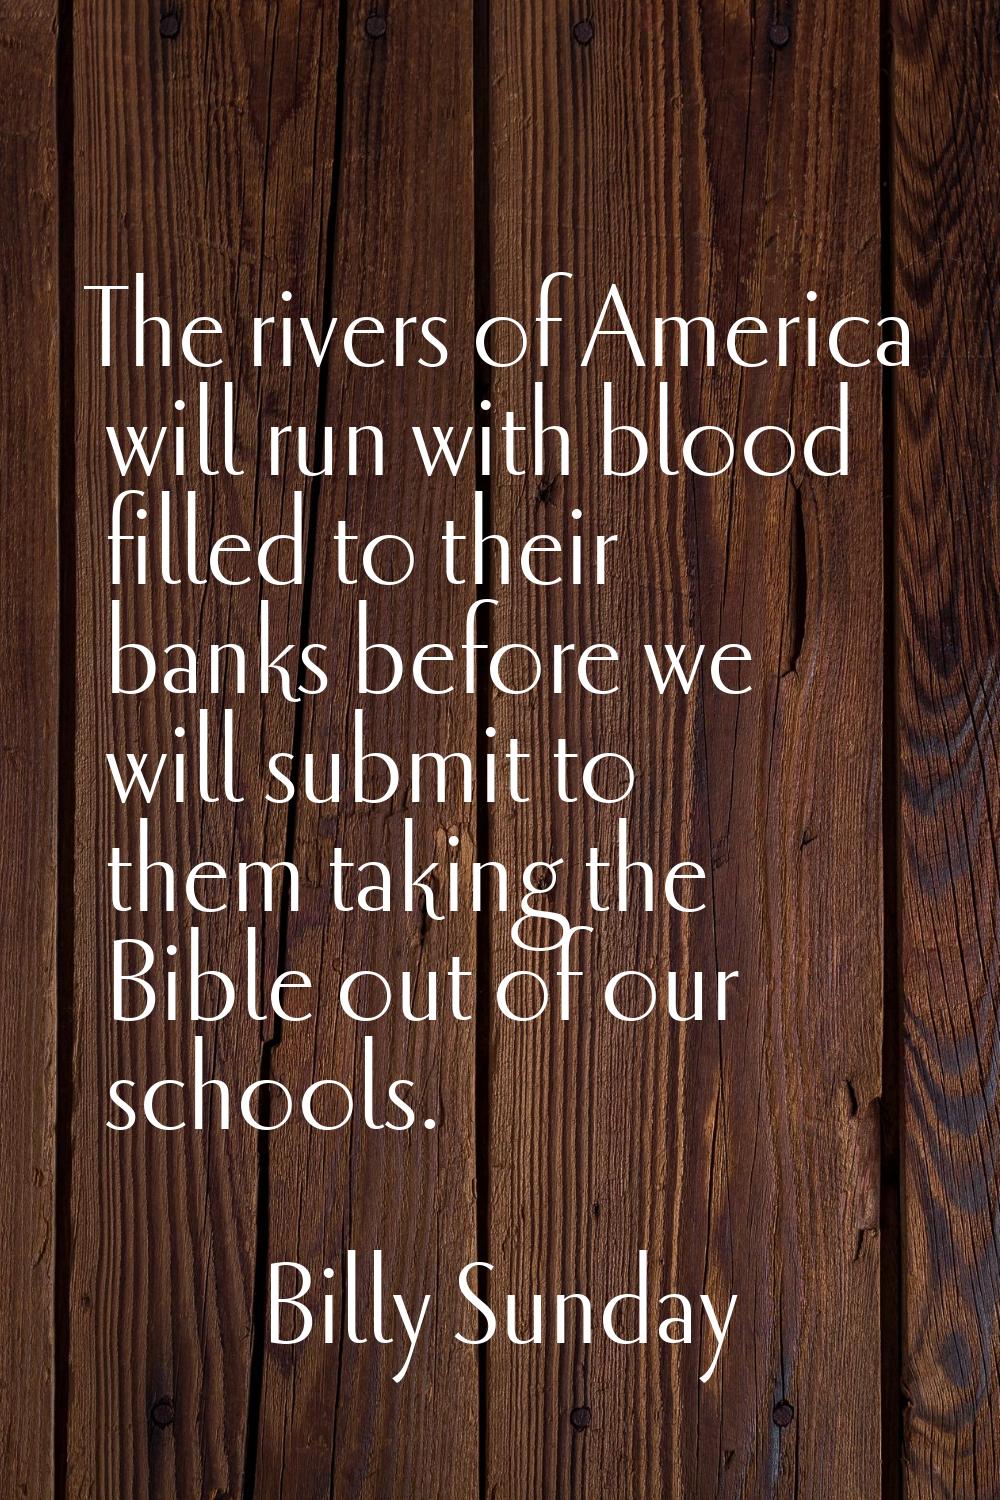 The rivers of America will run with blood filled to their banks before we will submit to them takin